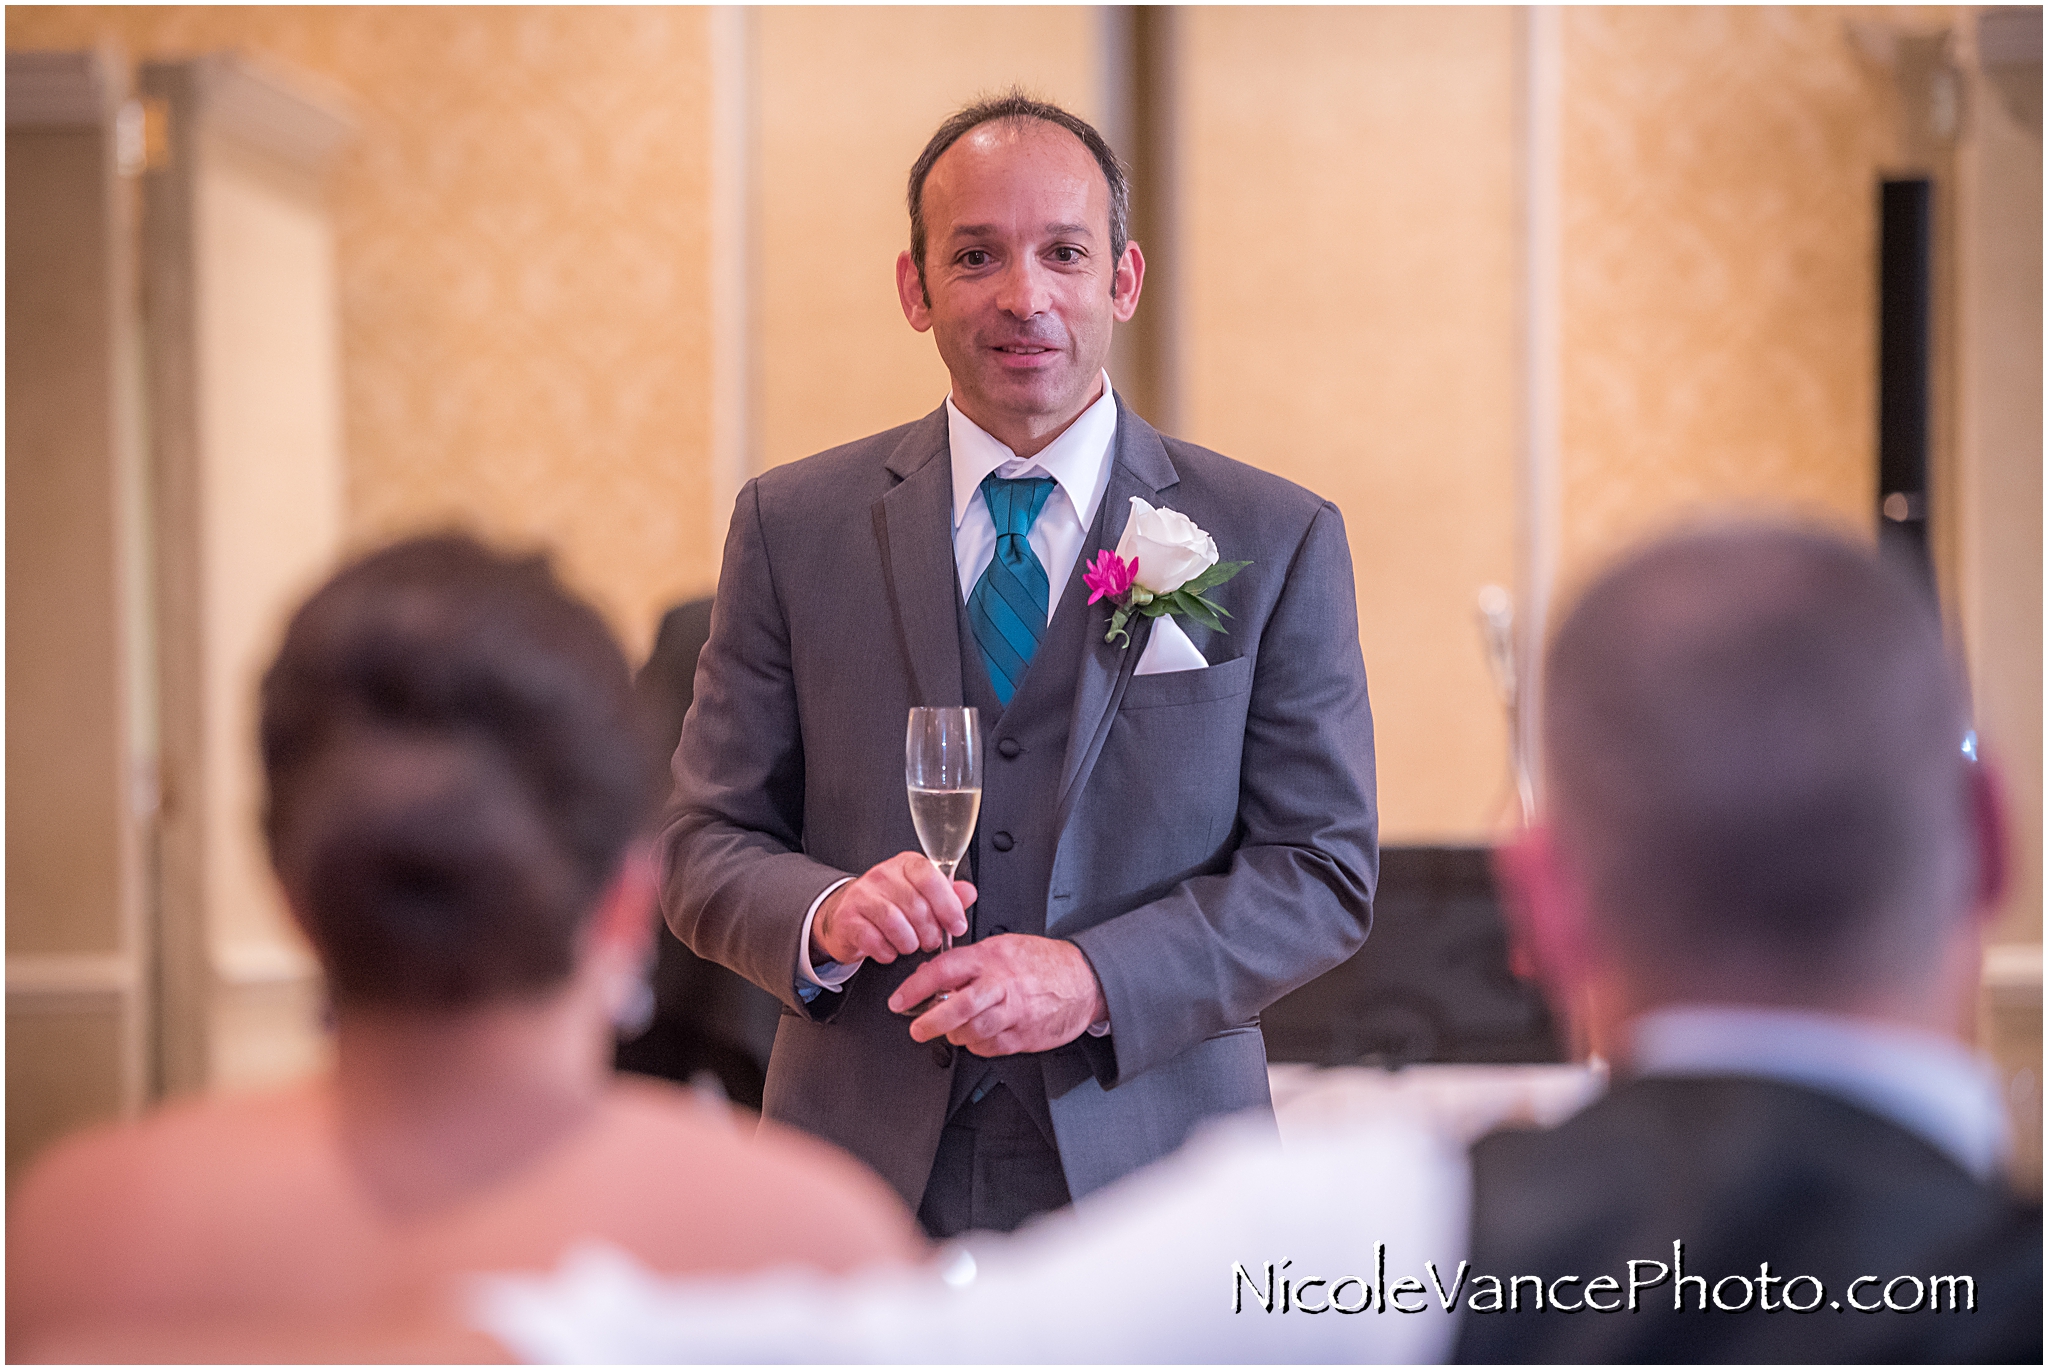 The best man makes a toast at the reception at the Virginia Crossings.